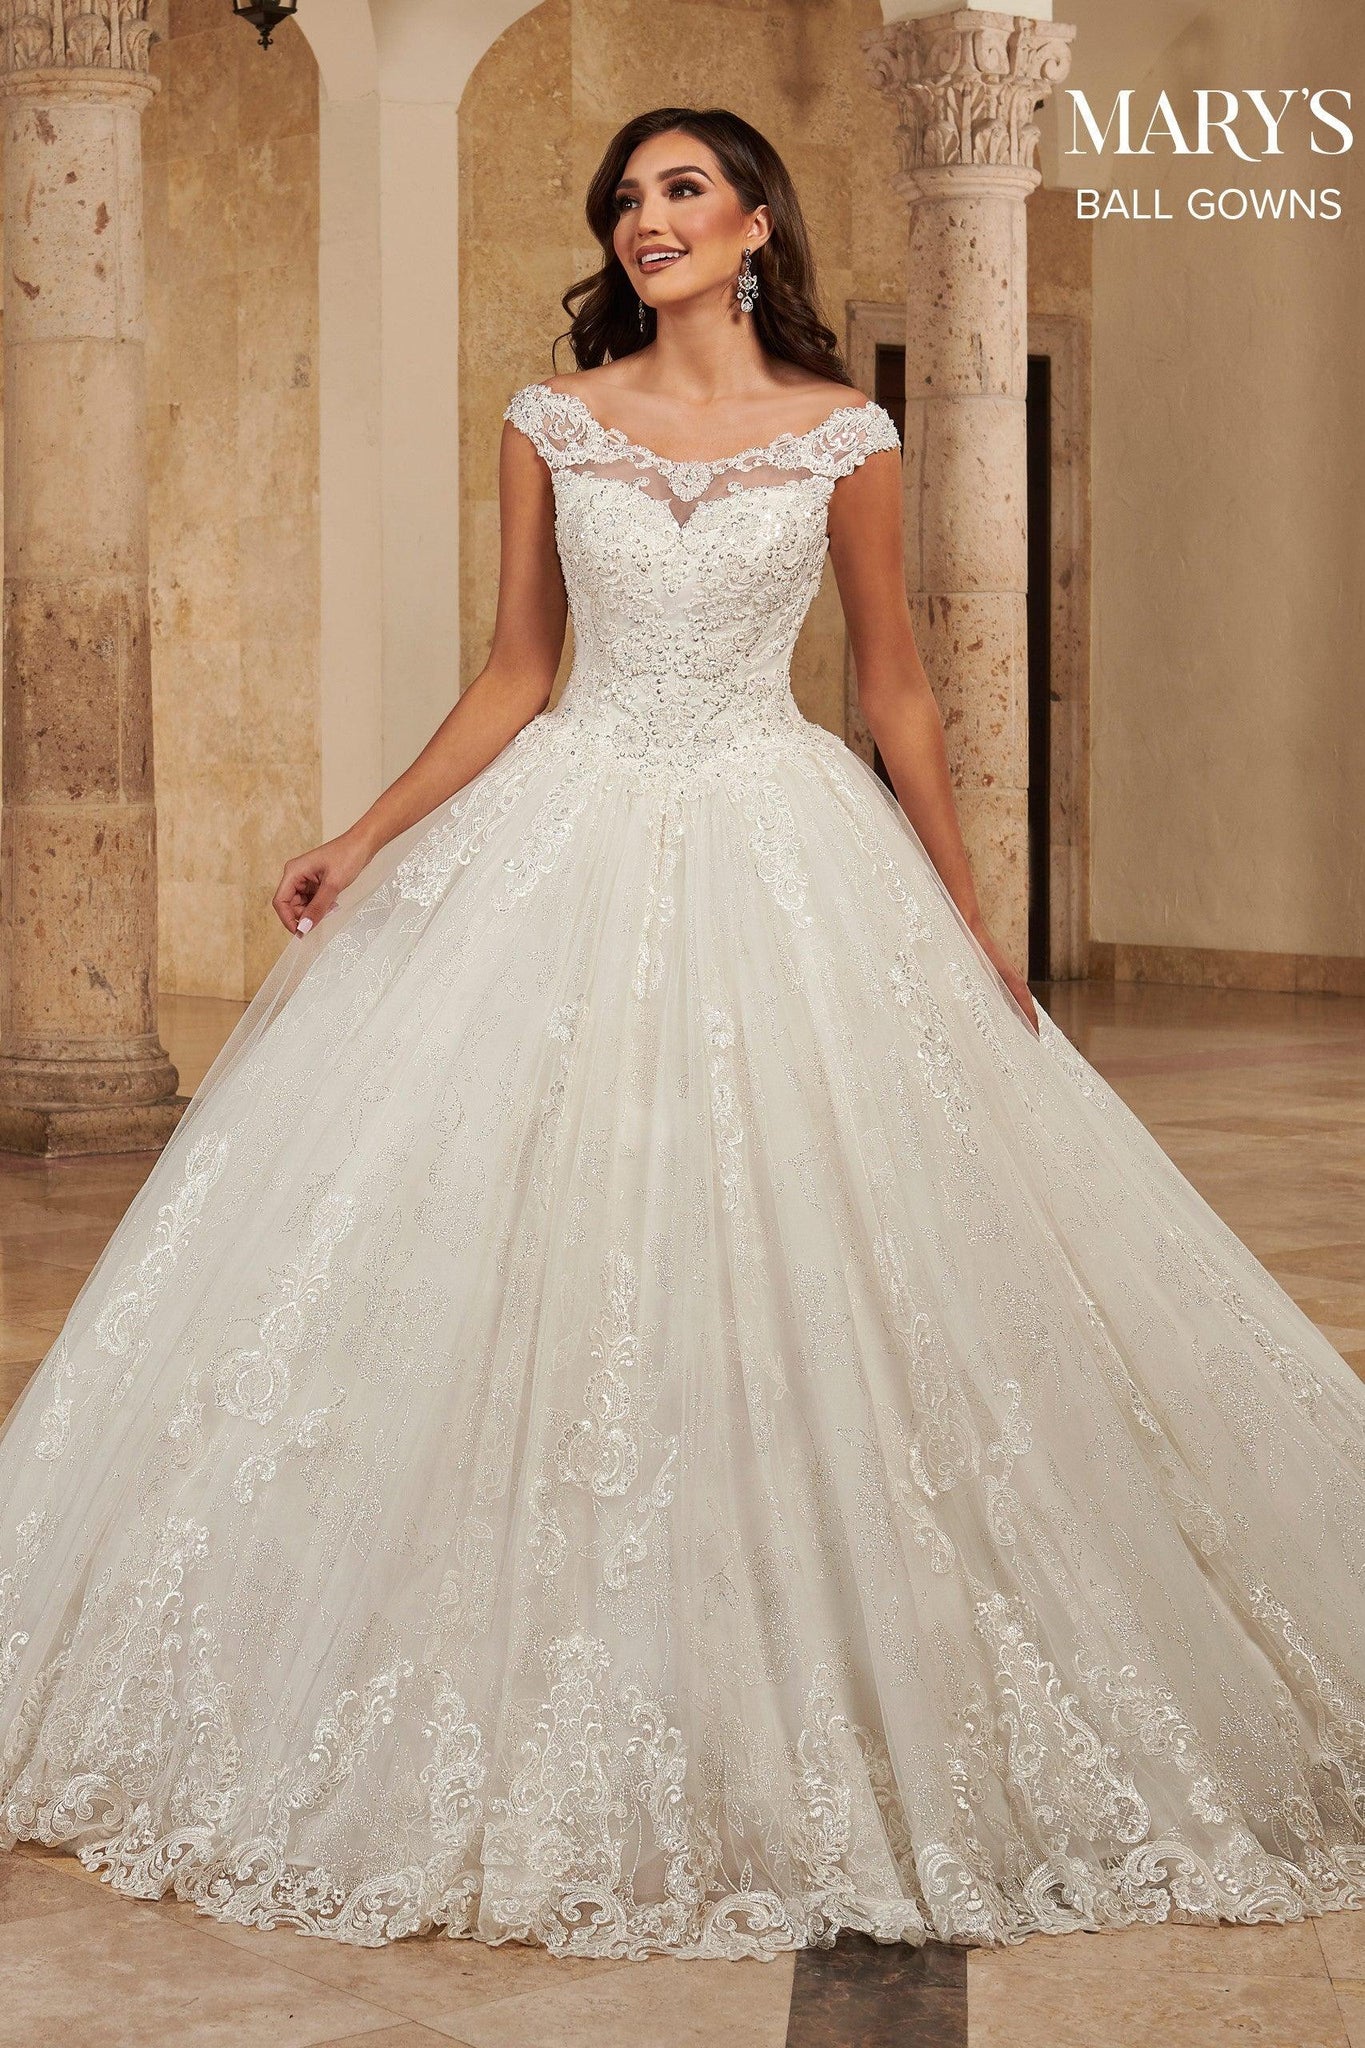 MARY'S BRIDAL - Jaqueline - Adore Bridal and Occasion Wear